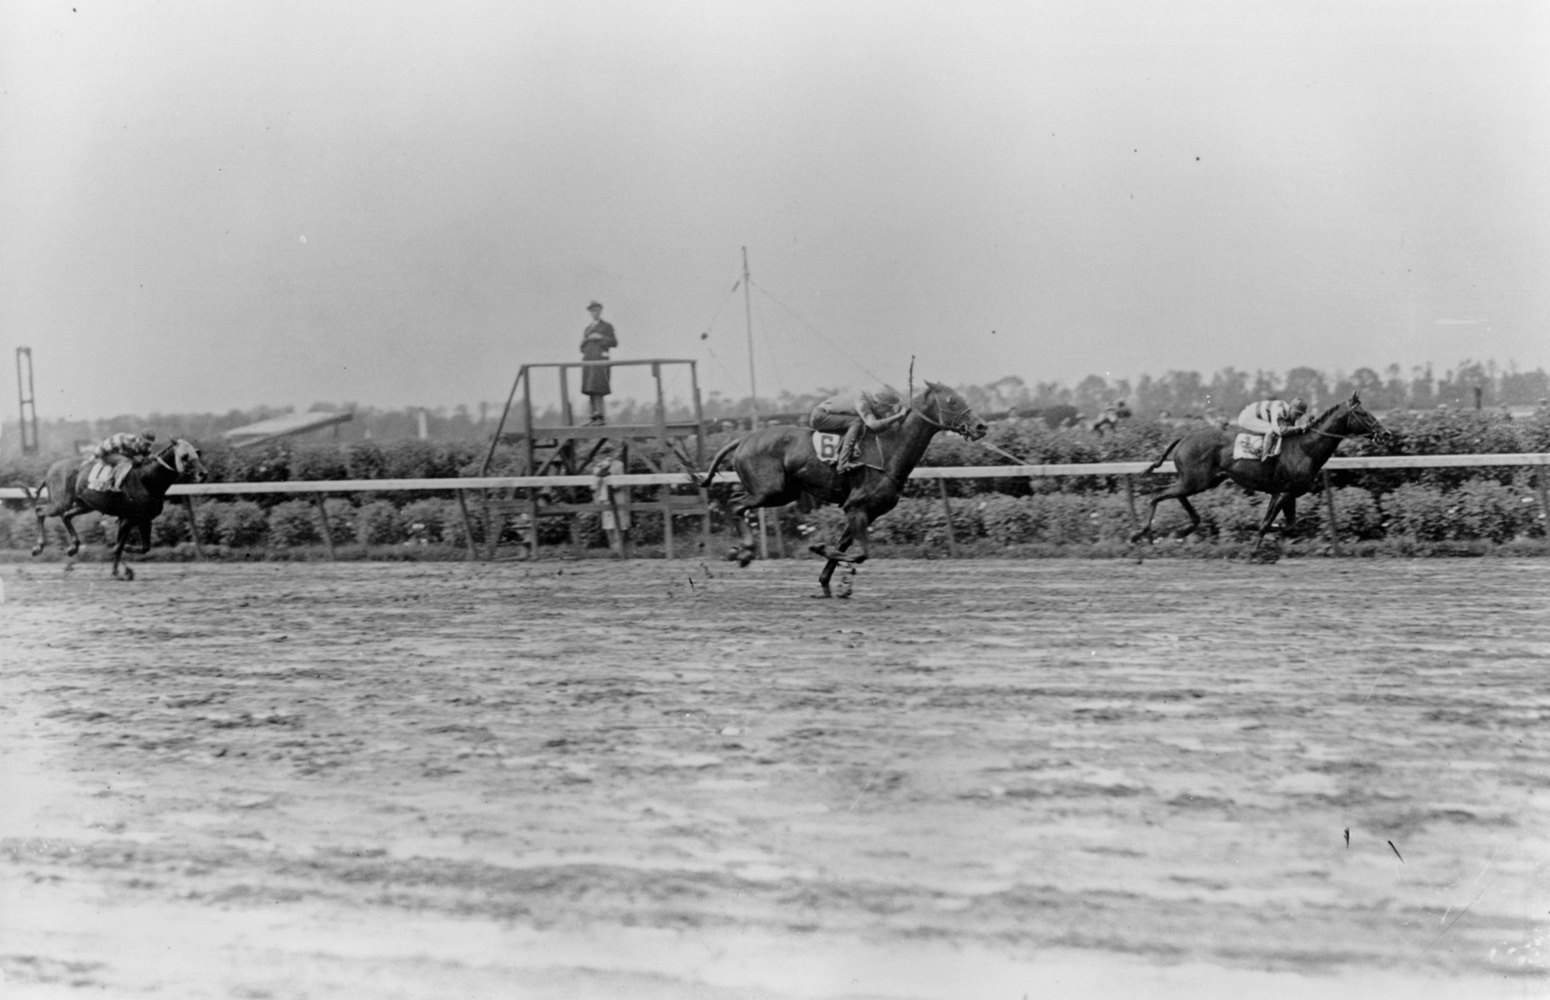 Mack Garner and Blue Larkspur winning the 1929 Belmont Stakes (Keeneland Library Cook Collection/Museum Collection)